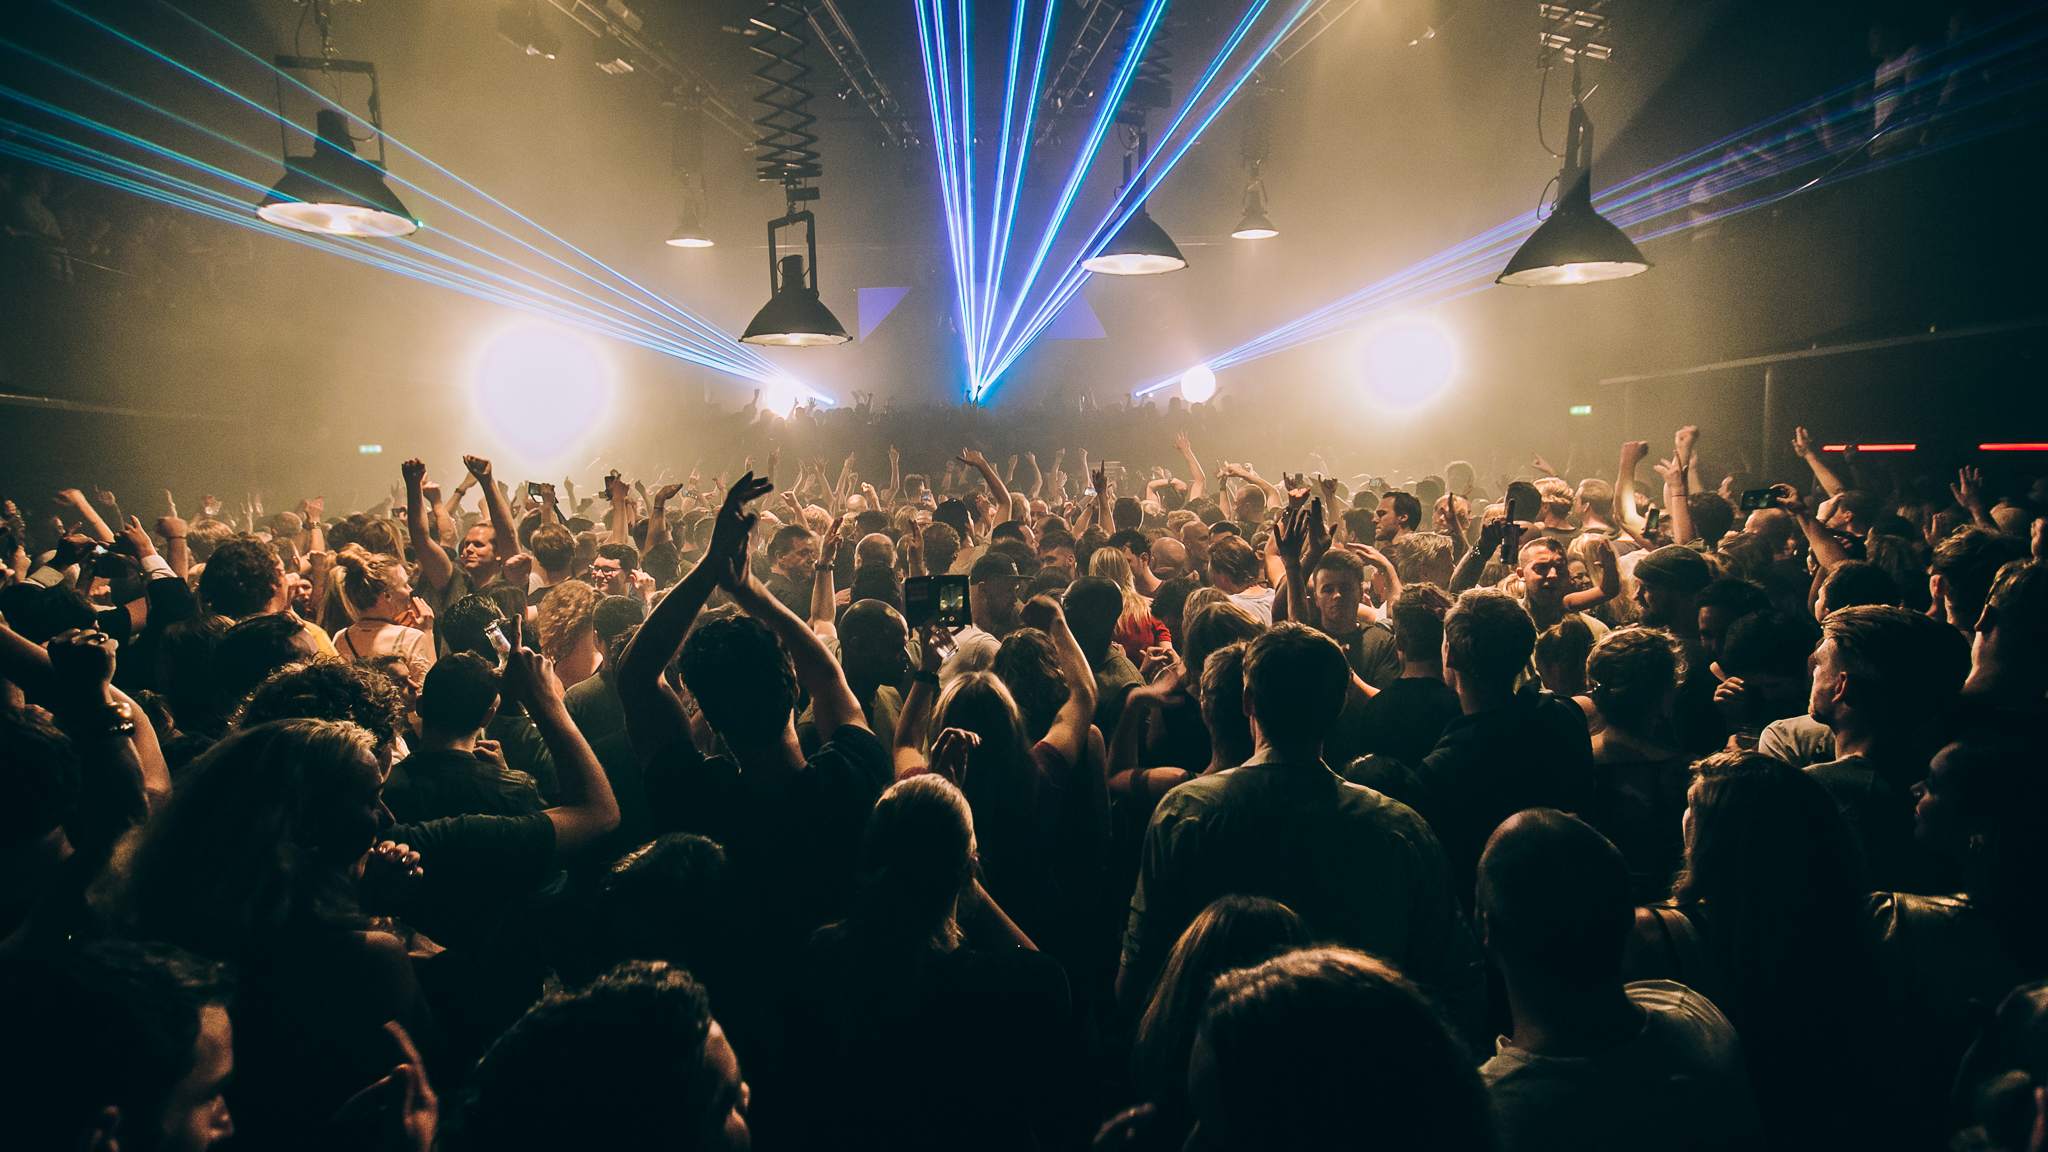 Reinier Zonneveld to play a 12-hour live set for De Marktkantine's party at ADE image